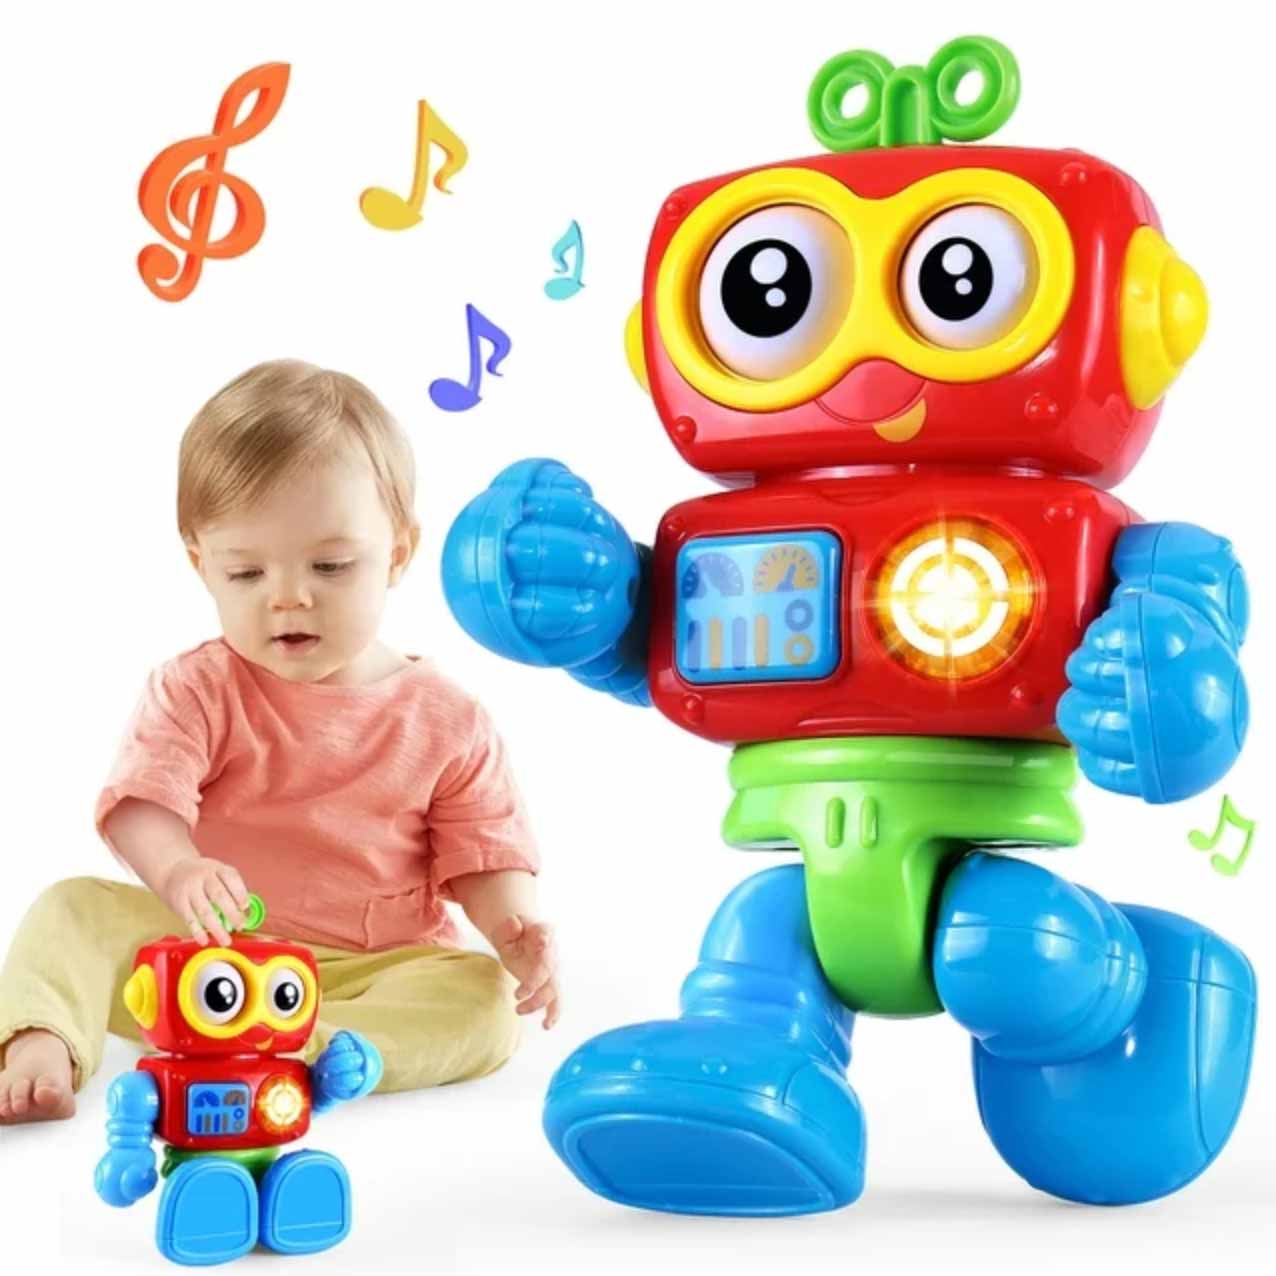 Baby playing with colorful robot toy